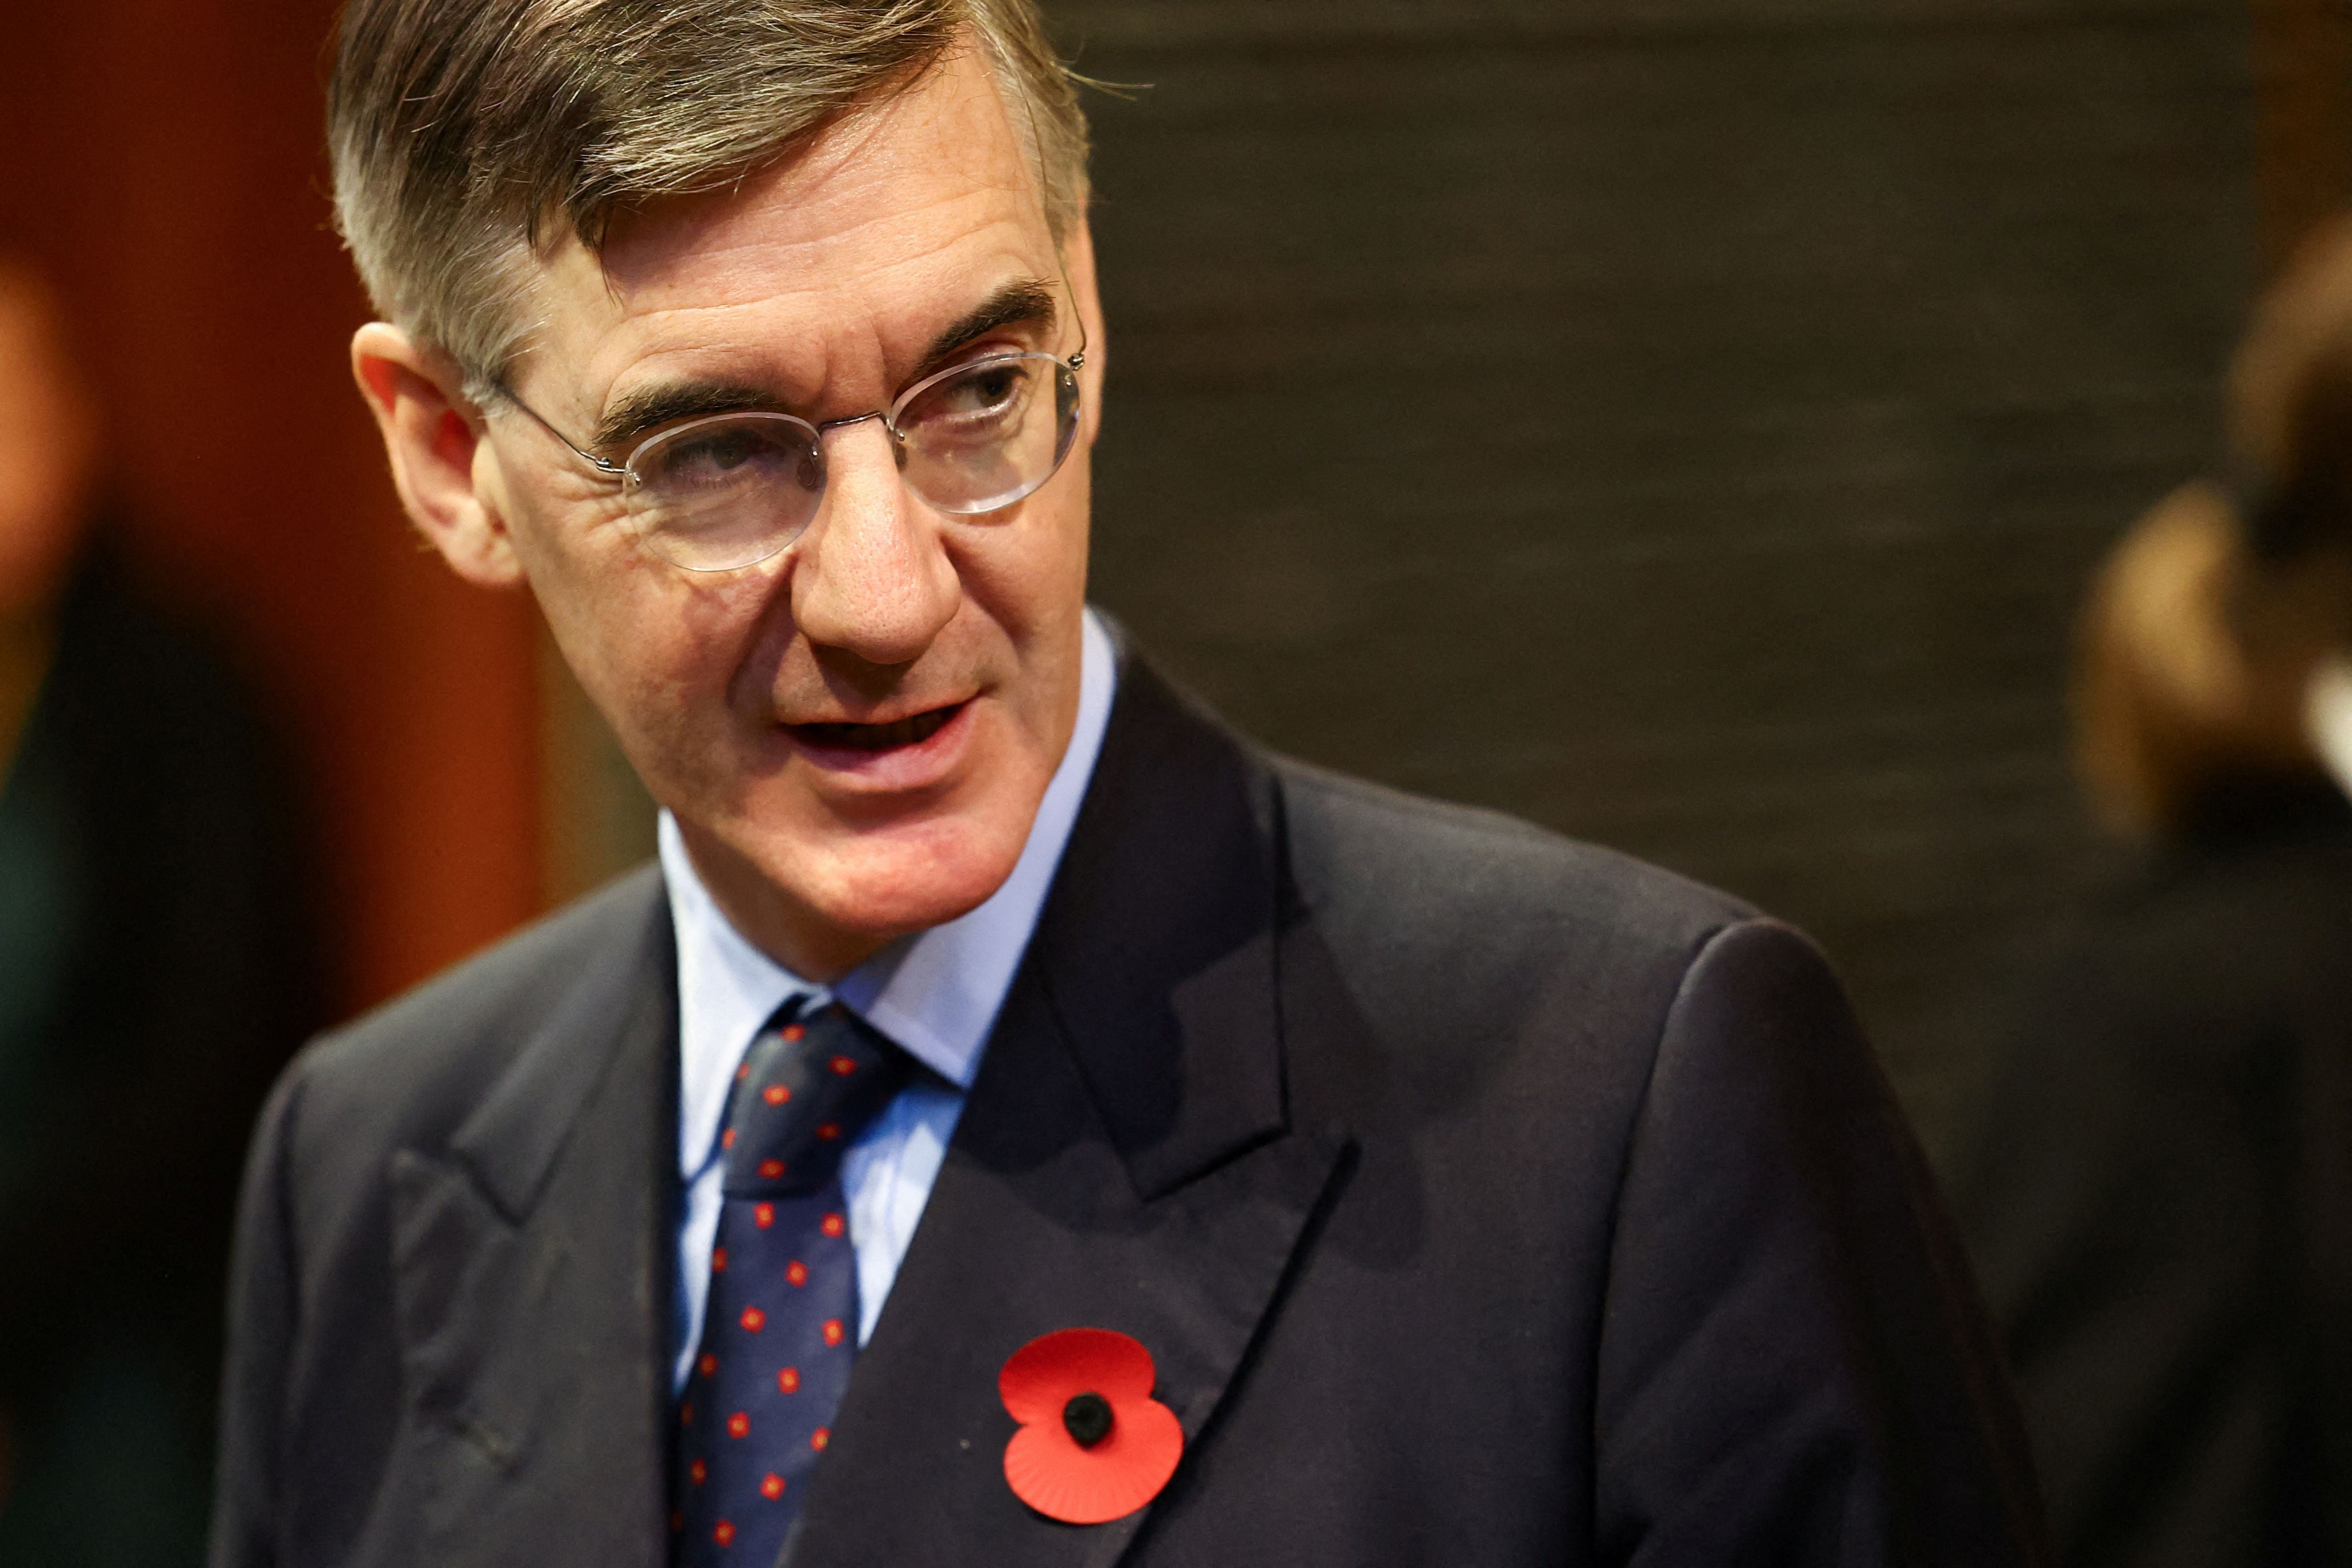 Sir Jacob Rees-Mogg said the rollout of voter ID was an attempt at ‘gerrymandering’ that backfired against the party